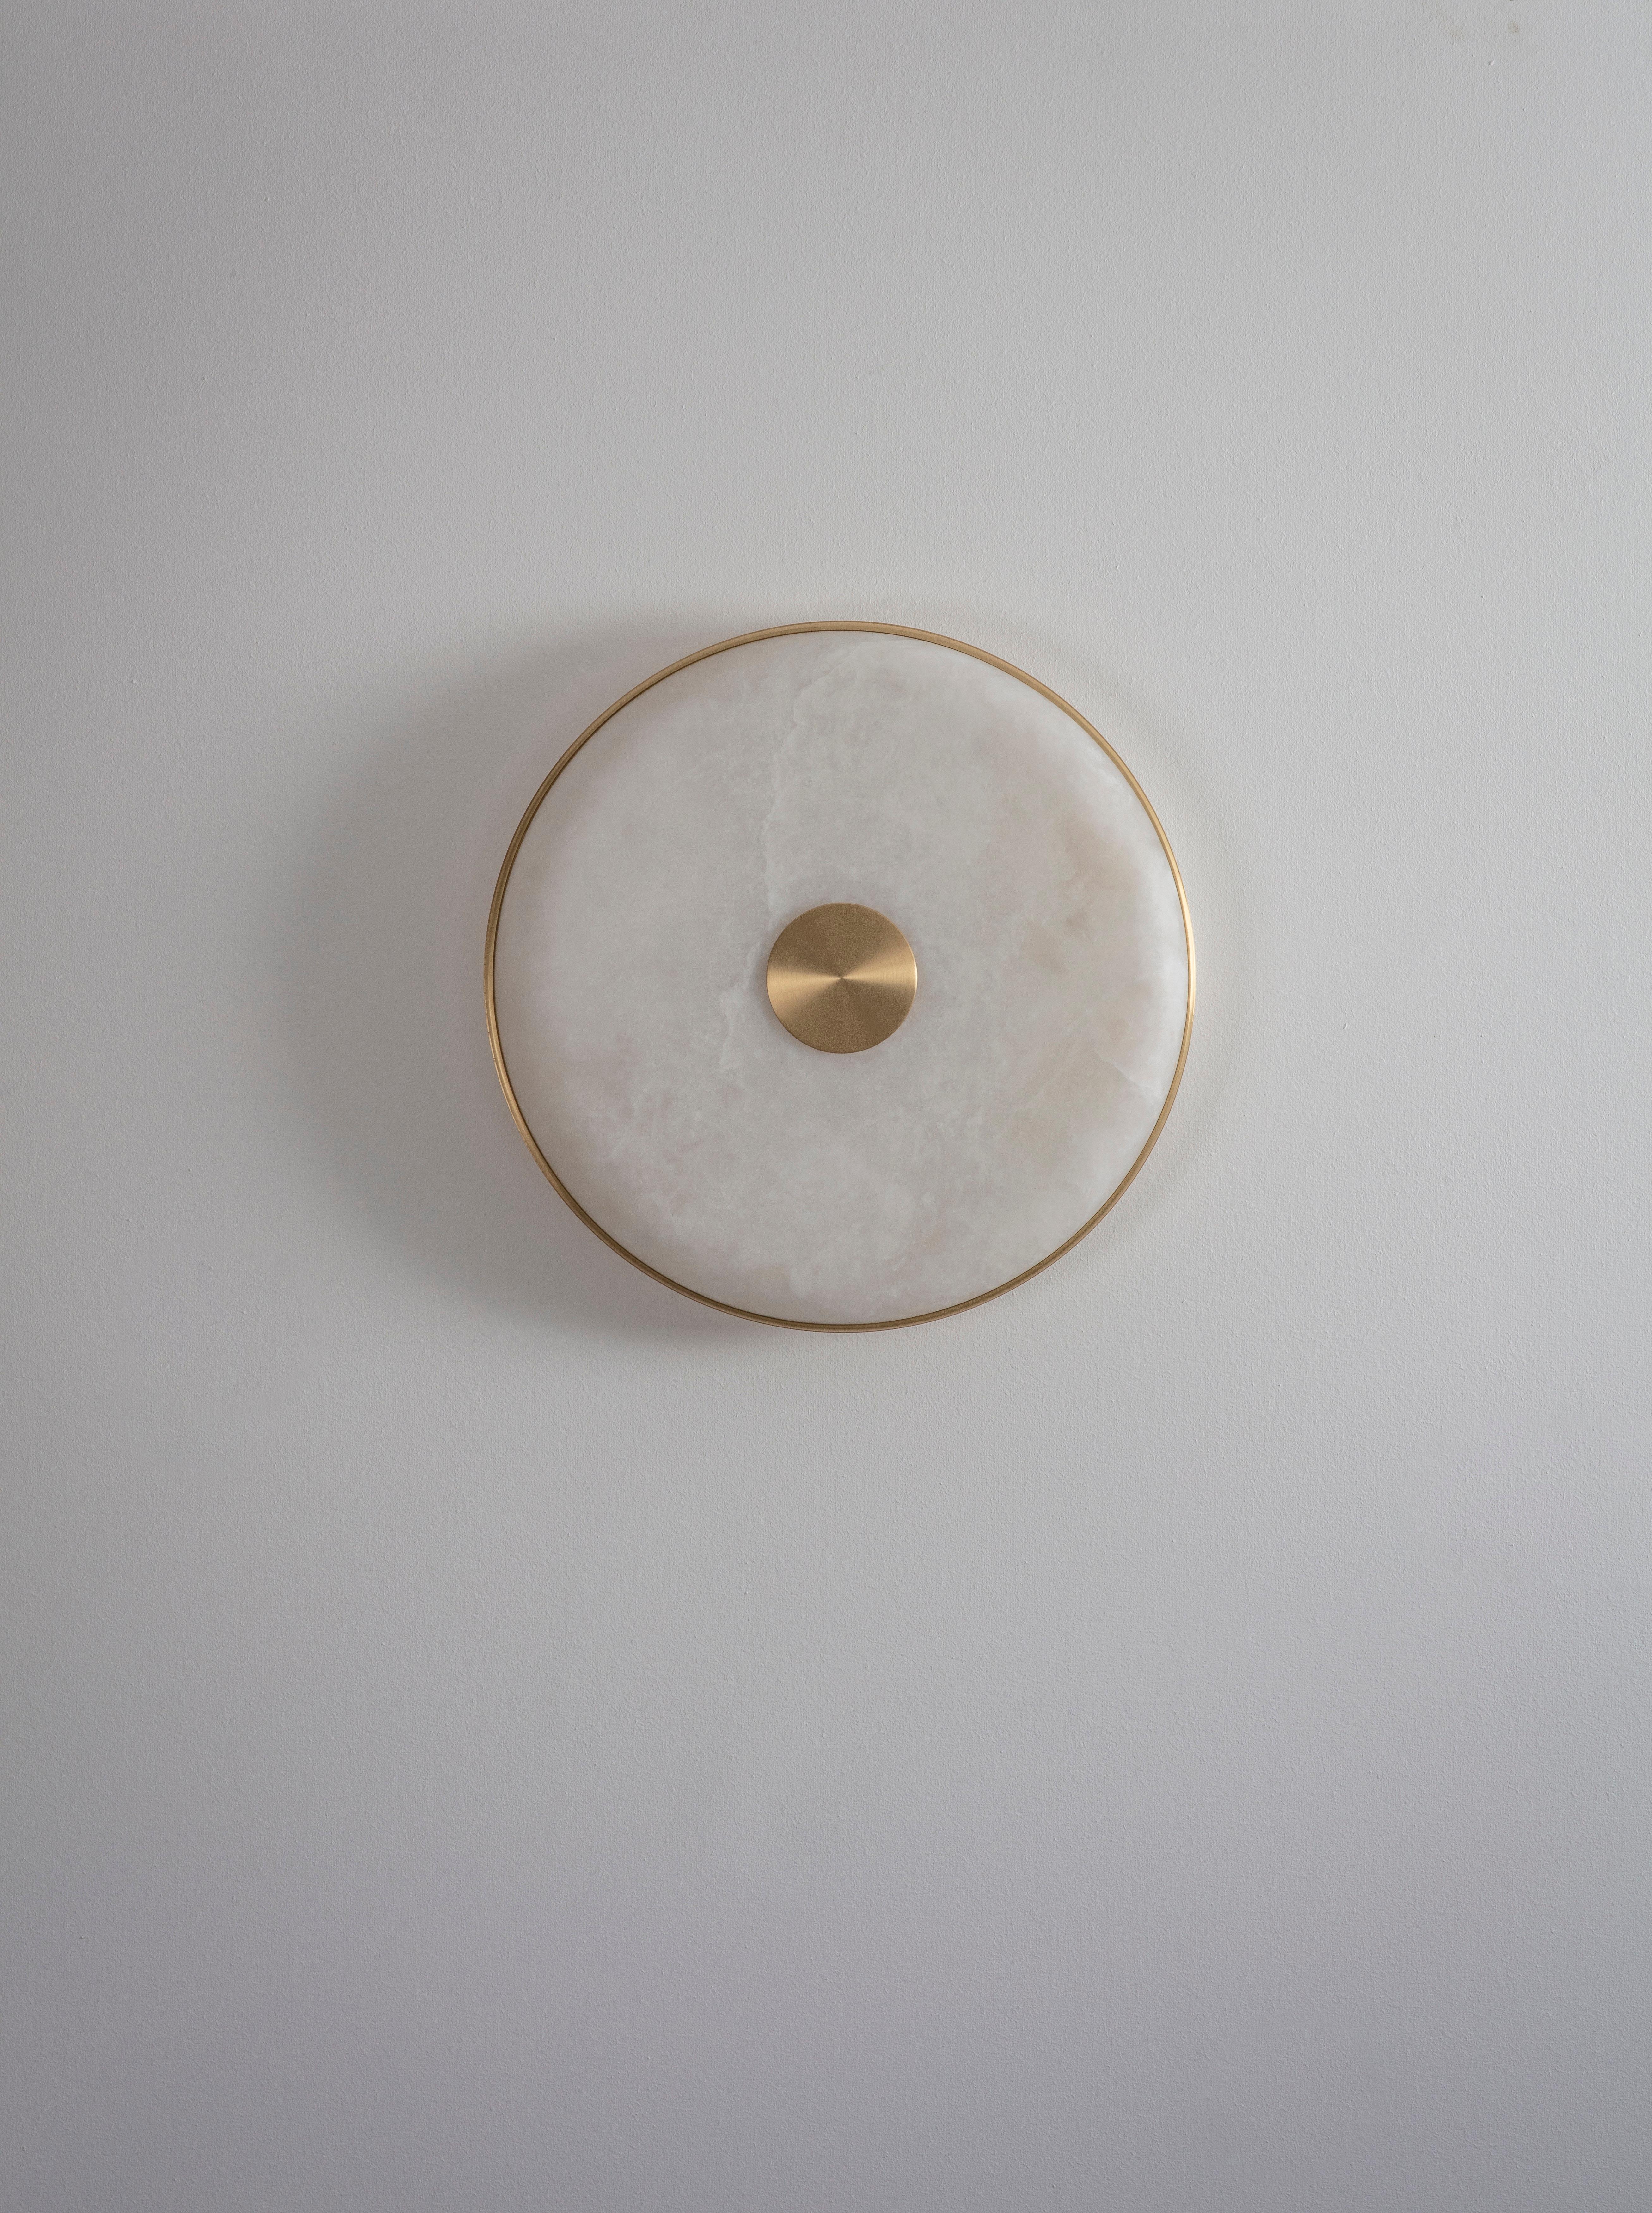 Beran wall light small - brass by Bert Frank.
Dimensions: 36 x 6.5 cm.
Materials: brass.

Available finishes: nickel
All our lamps can be wired according to each country. If sold to the USA it will be wired for the USA for instance.

Machined